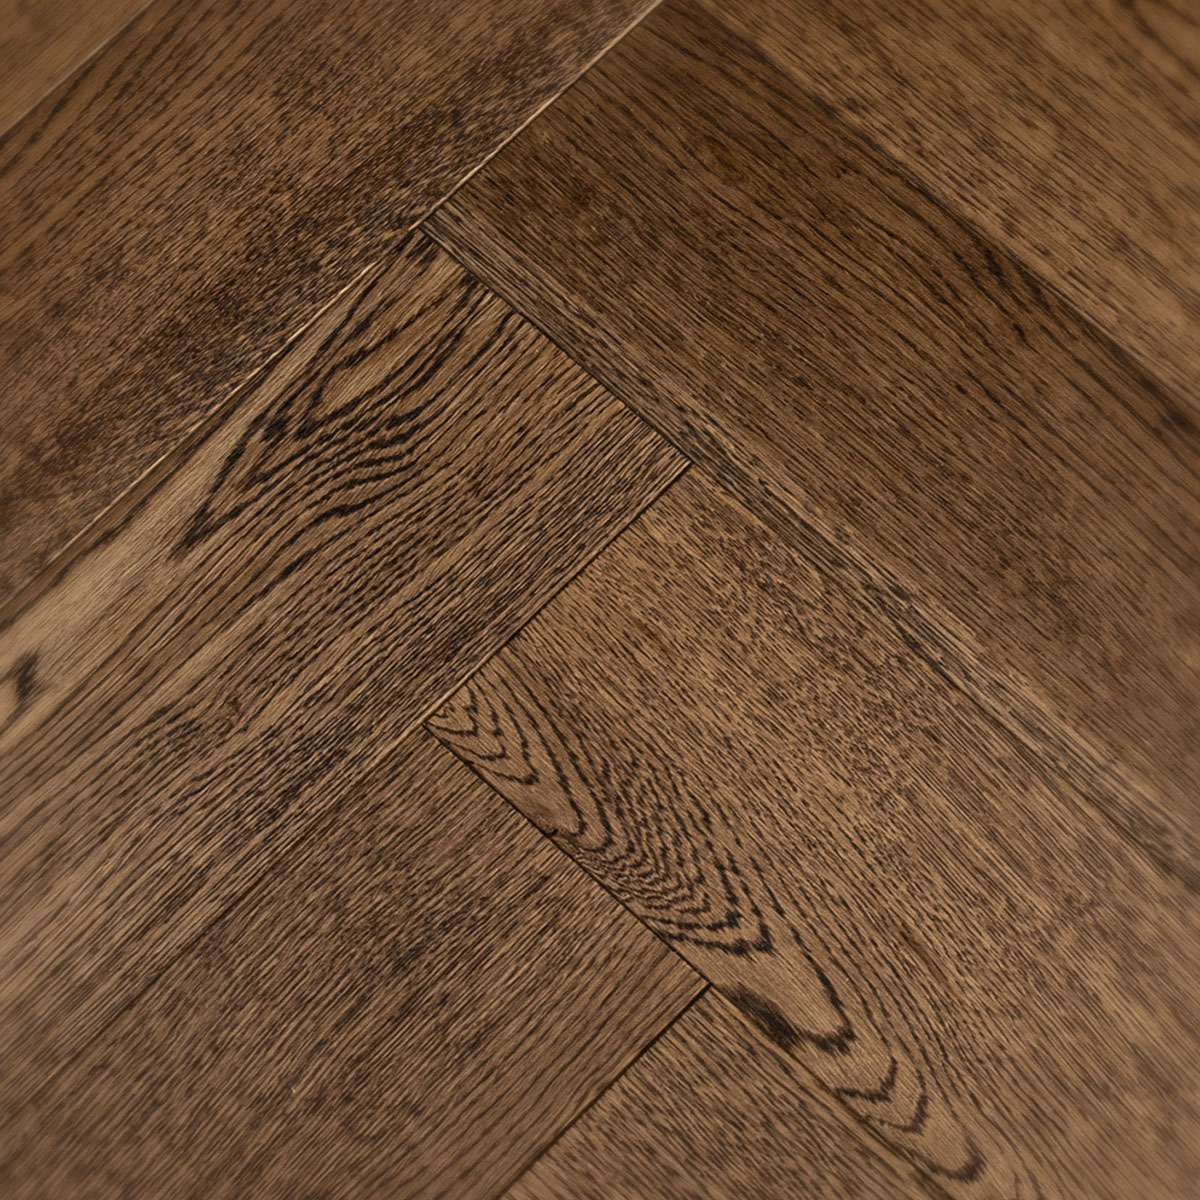 Natural-grade European oak floor finished with a walnut stain